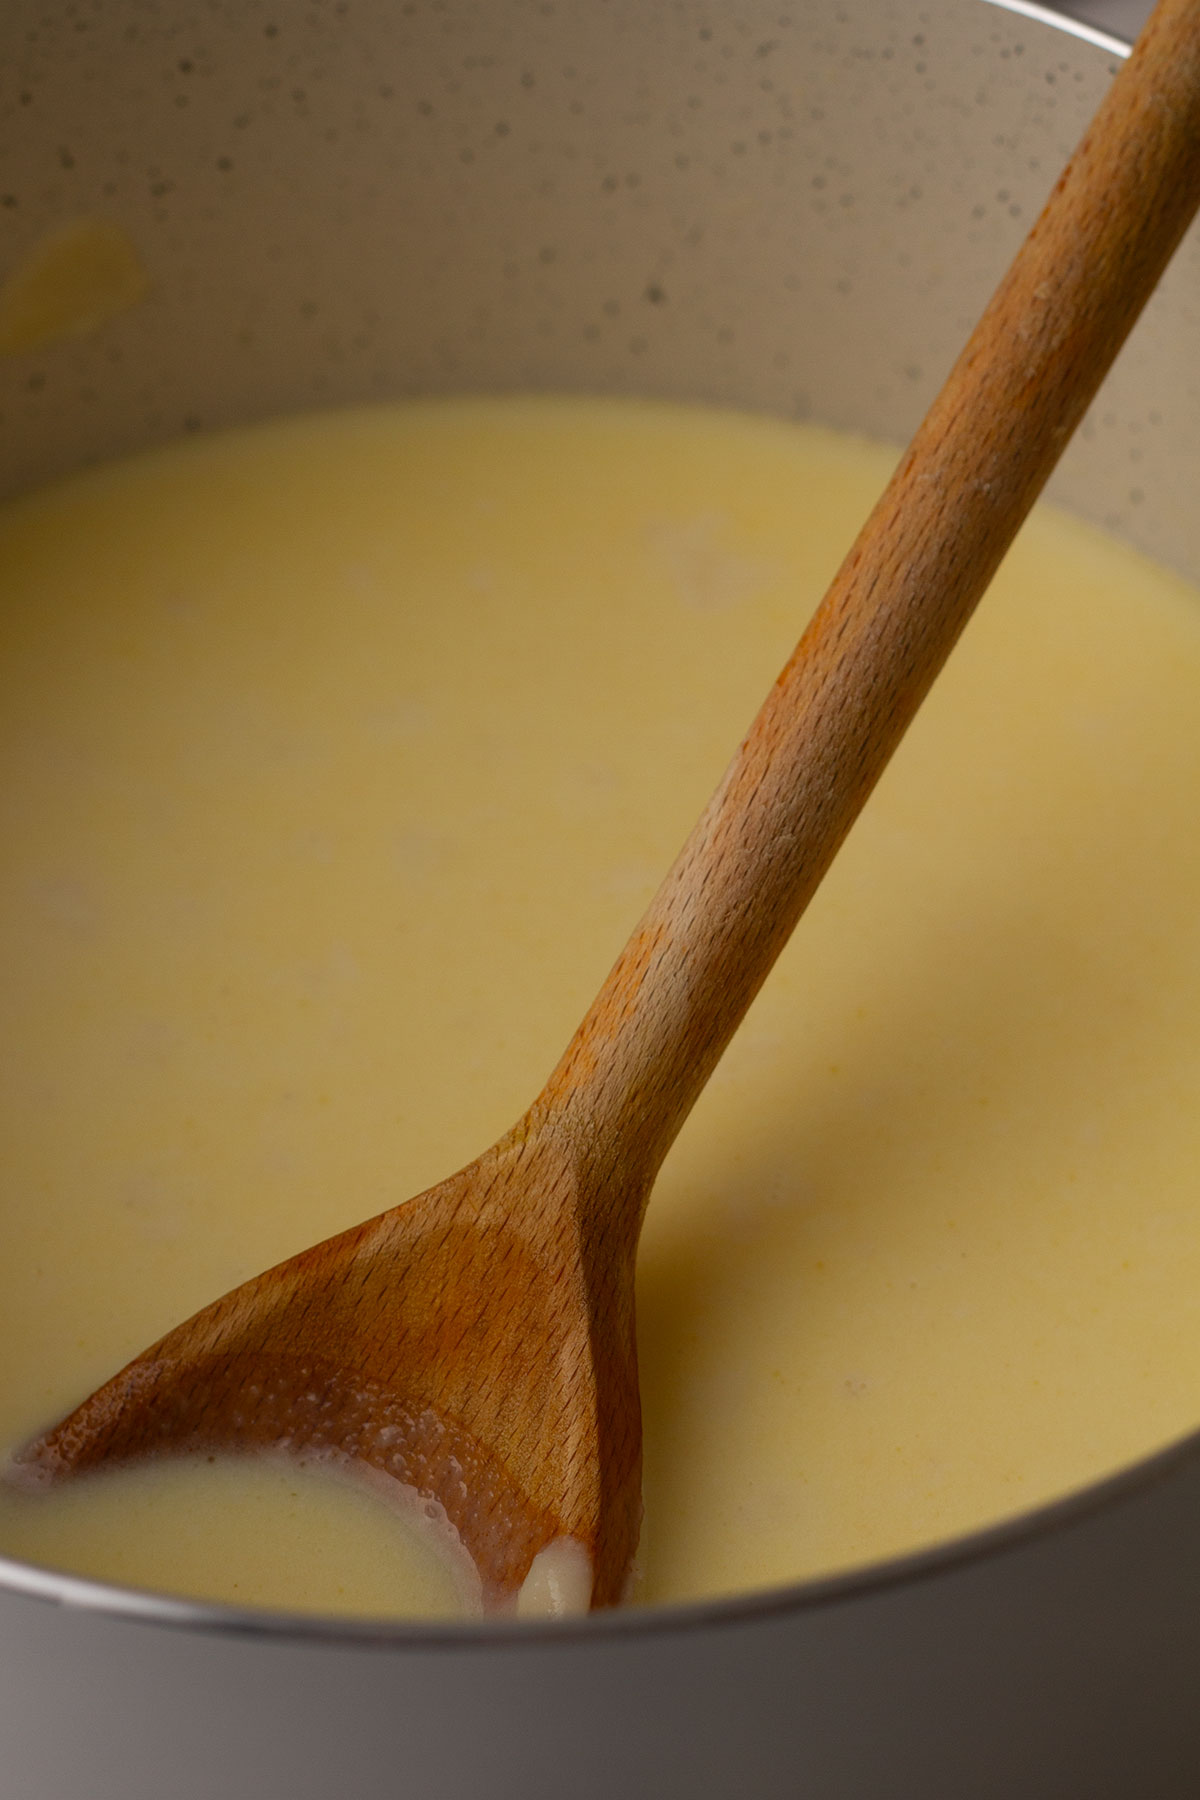 Gradually adding the milk while stirring constantly with a wooden spoon the sauce is velvety and thick.